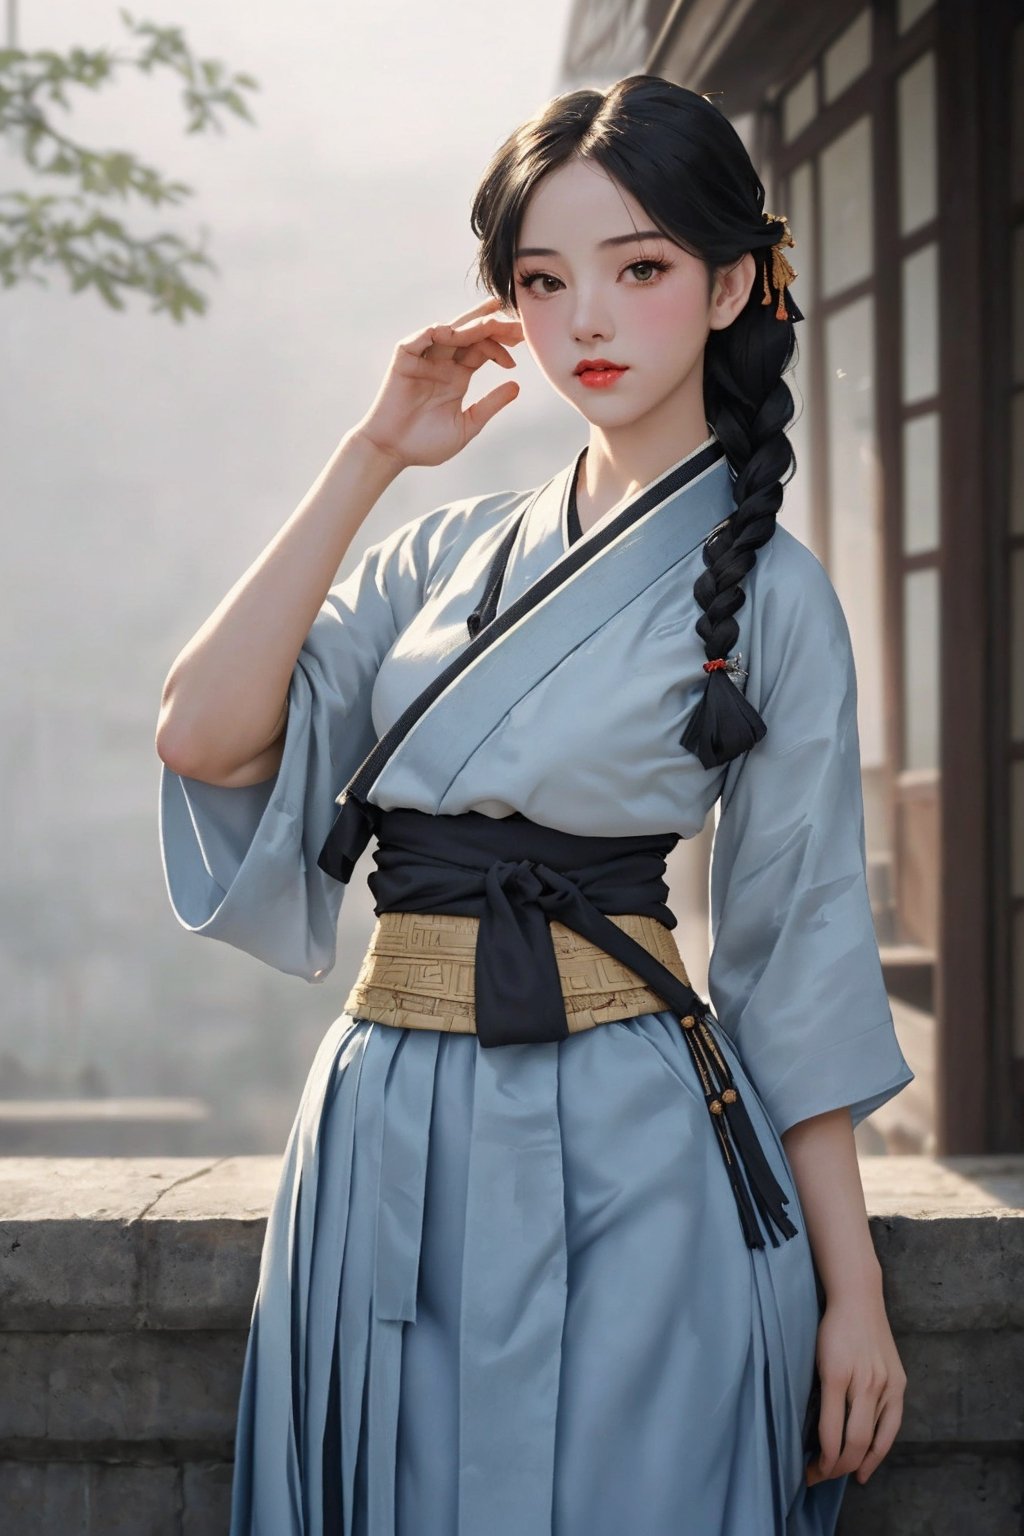 (1 women, beutiful face, 20-Year-Old female at 1920s), (Black Hair, braided hair back, sexy pose), (Dressed in 1920s style colorful hanbok), (Foggy Seoul Streets at 1920s), (Dynamic Pose:1.4), Centered, (Waist-up Shot:1.4), From Front Shot, Insane Details, Intricate Face Detail, Intricate Hand Details, Cinematic Shot and Lighting, Realistic and Vibrant Colors, Masterpiece, Sharp Focus, Ultra Detailed, Incredibly Realistic Environment and Scene, ,Samurai girl